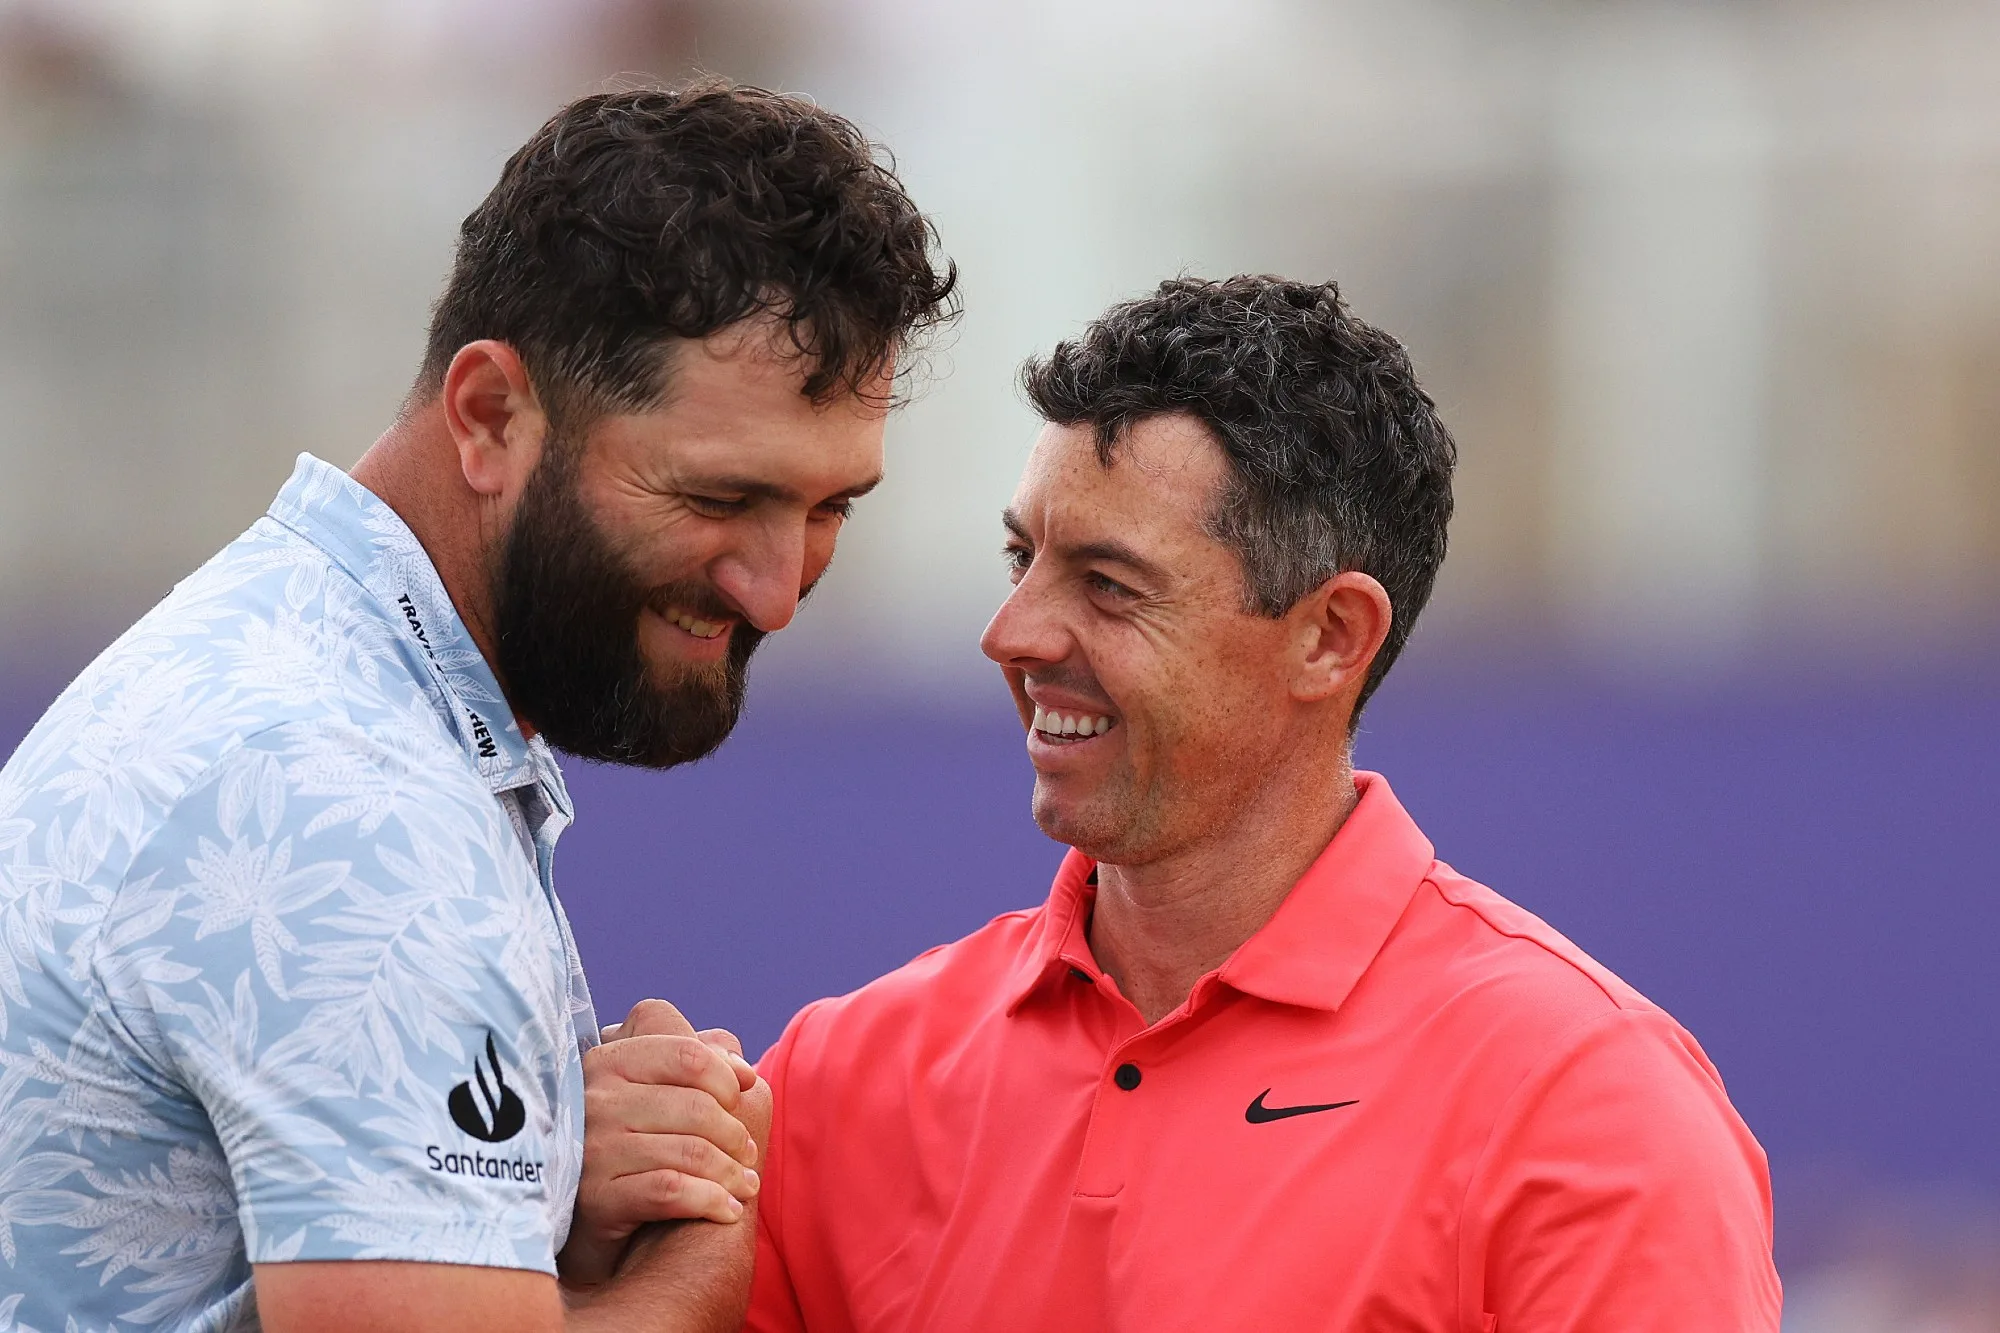 Rory McIlroy hails 'opportunistic' Jon Rahm for LIV Golf switch